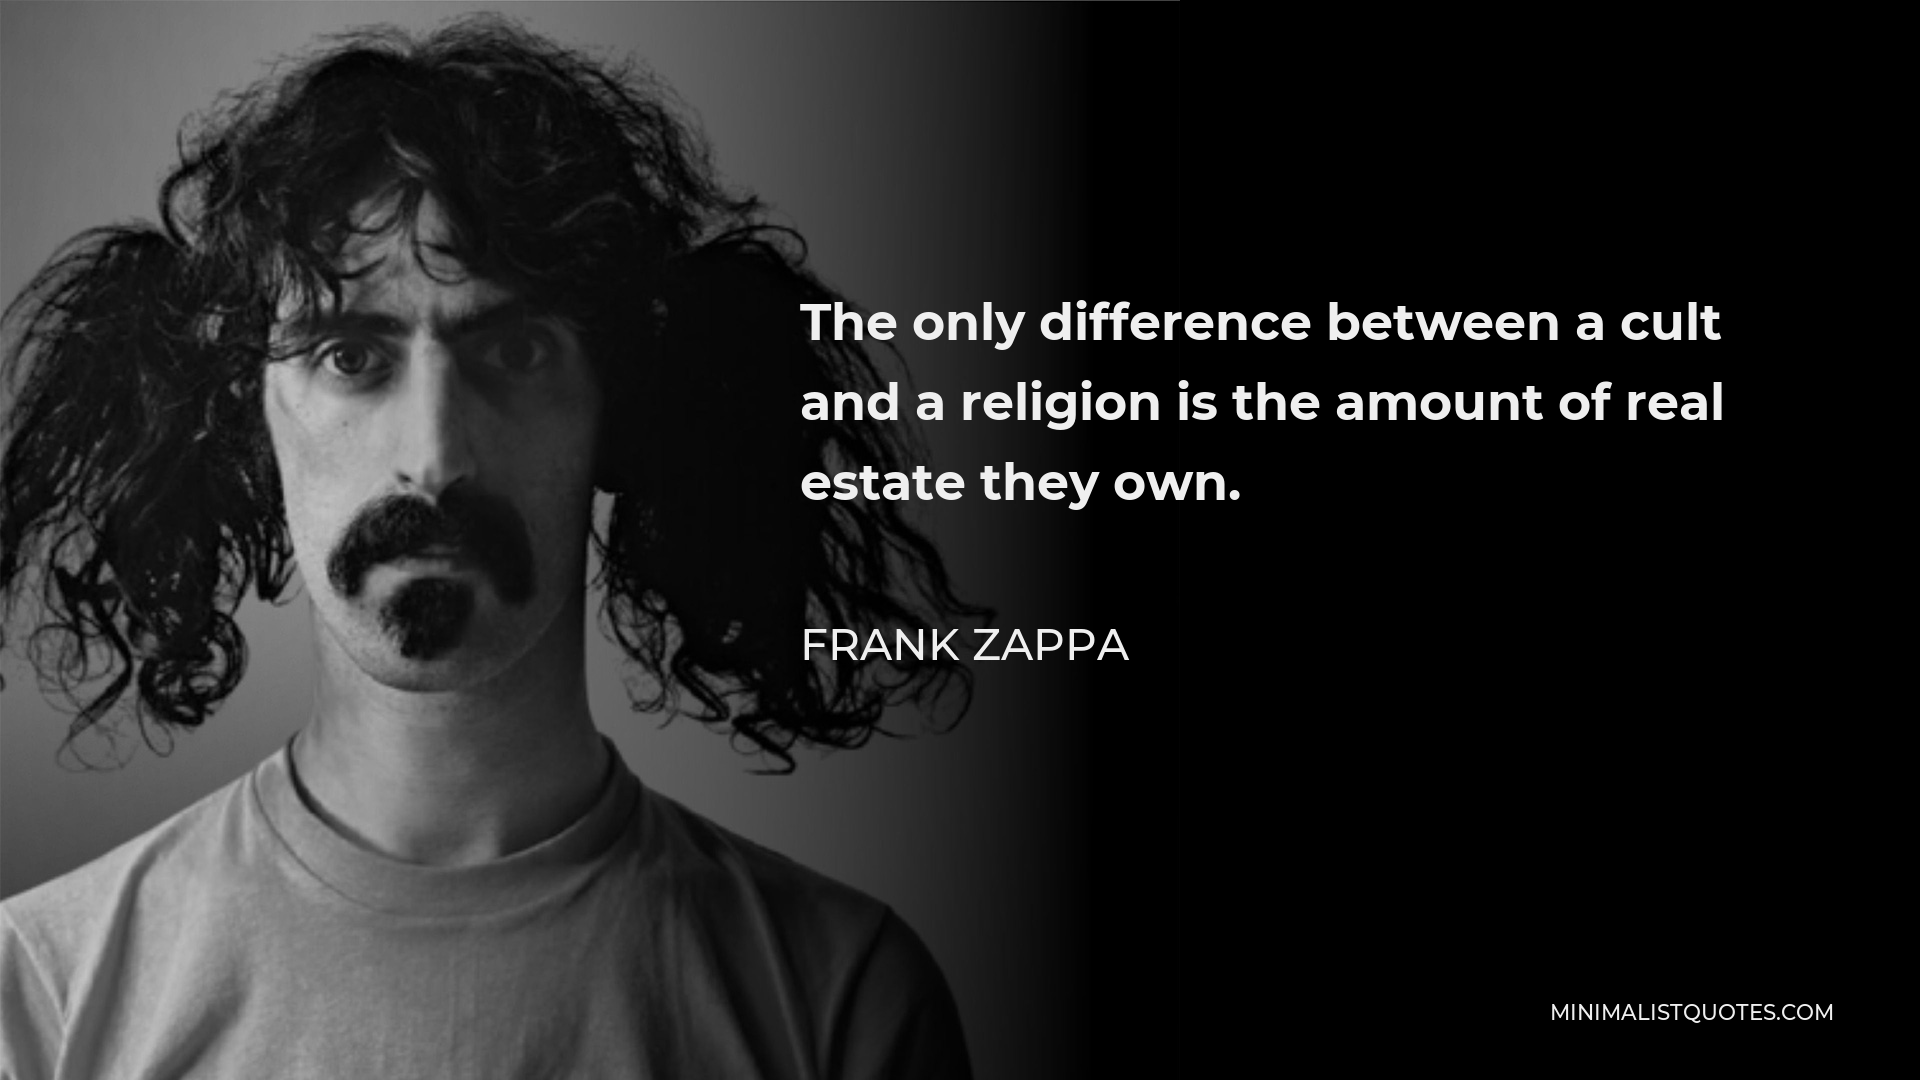 Frank Zappa Quote - The only difference between a cult and a religion is the amount of real estate they own.